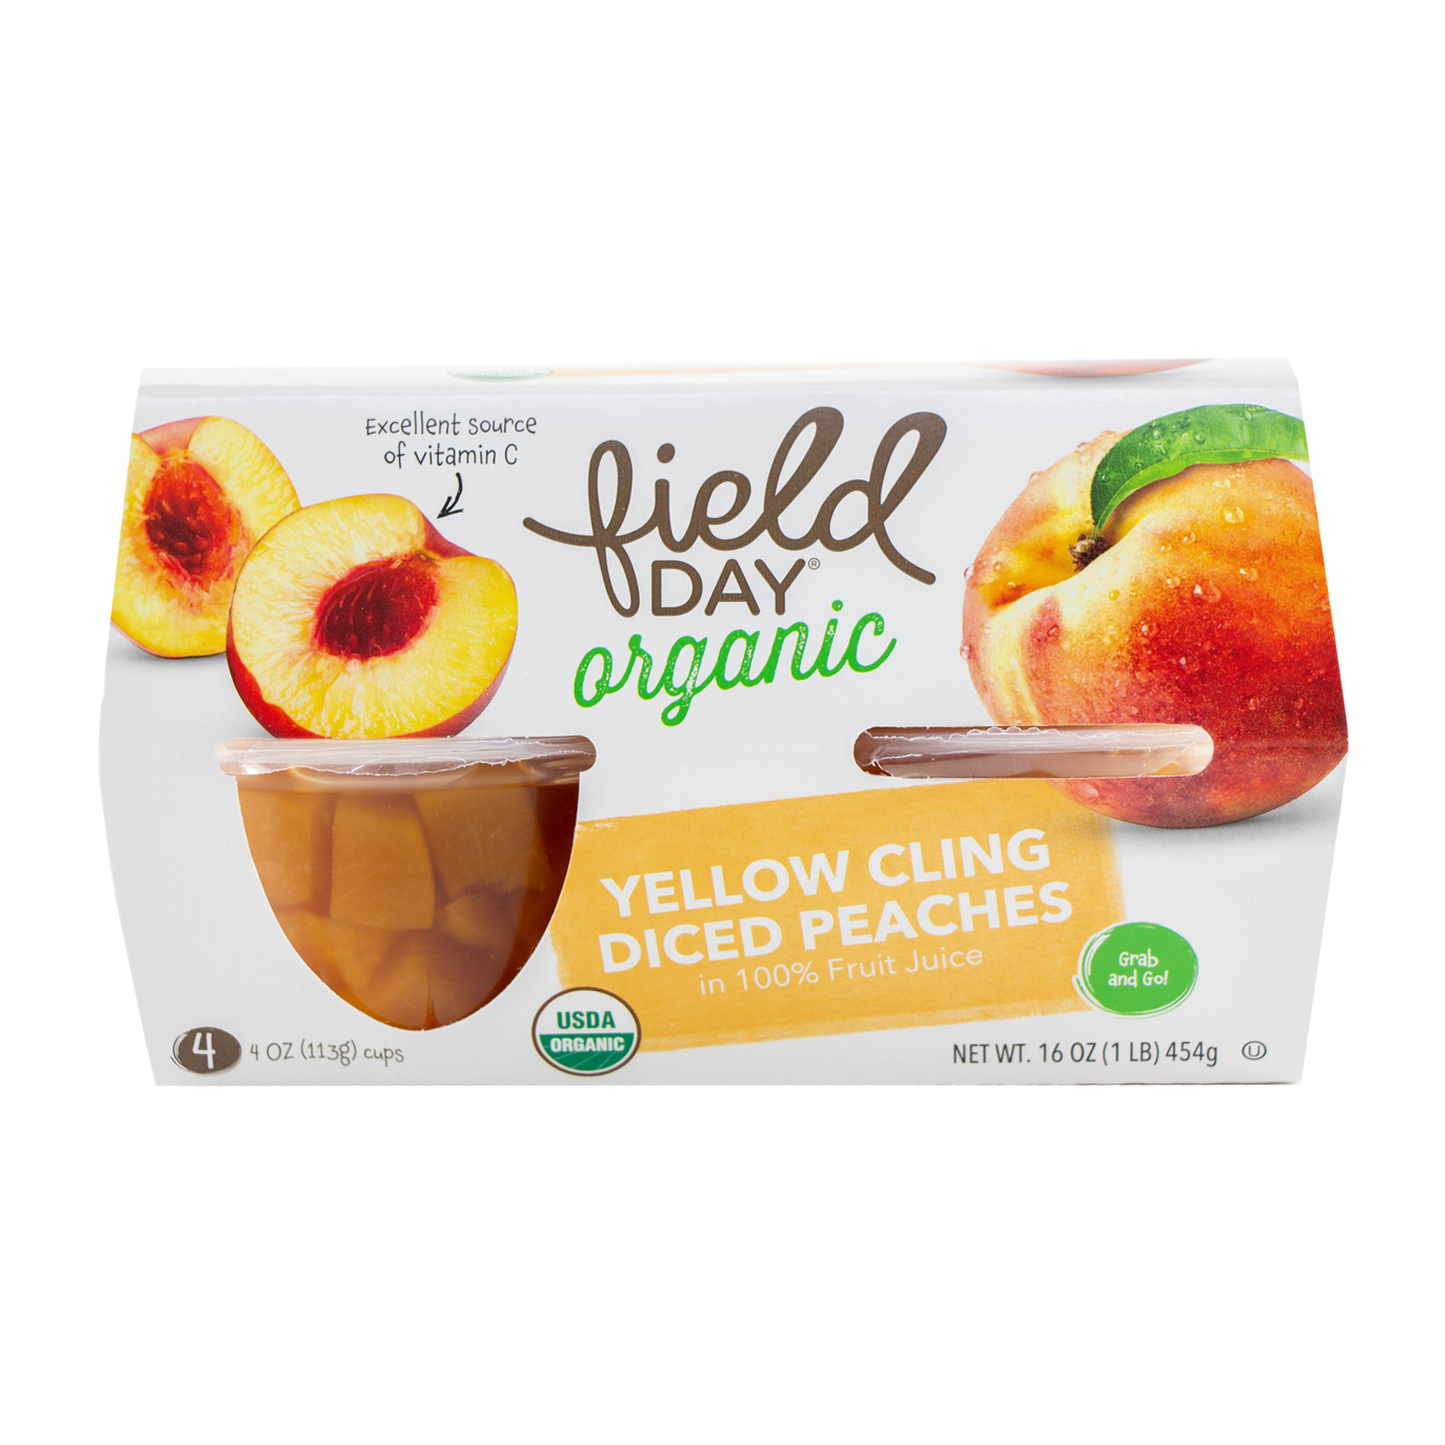 Field Day Organic - Yellow Cling Diced Peaches